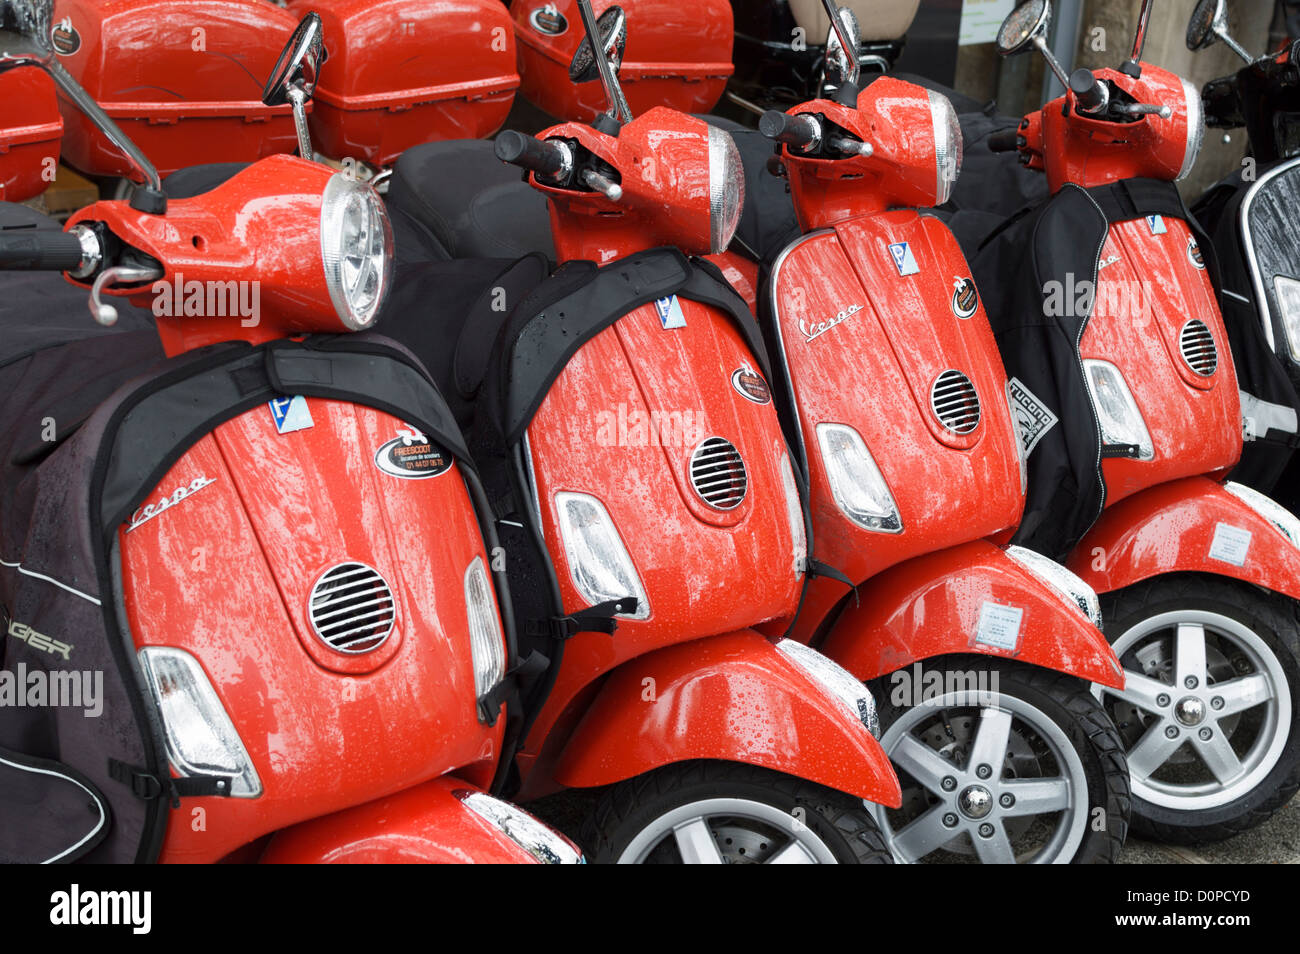 Paris, France: Red Piaggio Vespa motor scooters for hire - parked in a row outside a rental shop. Stock Photo